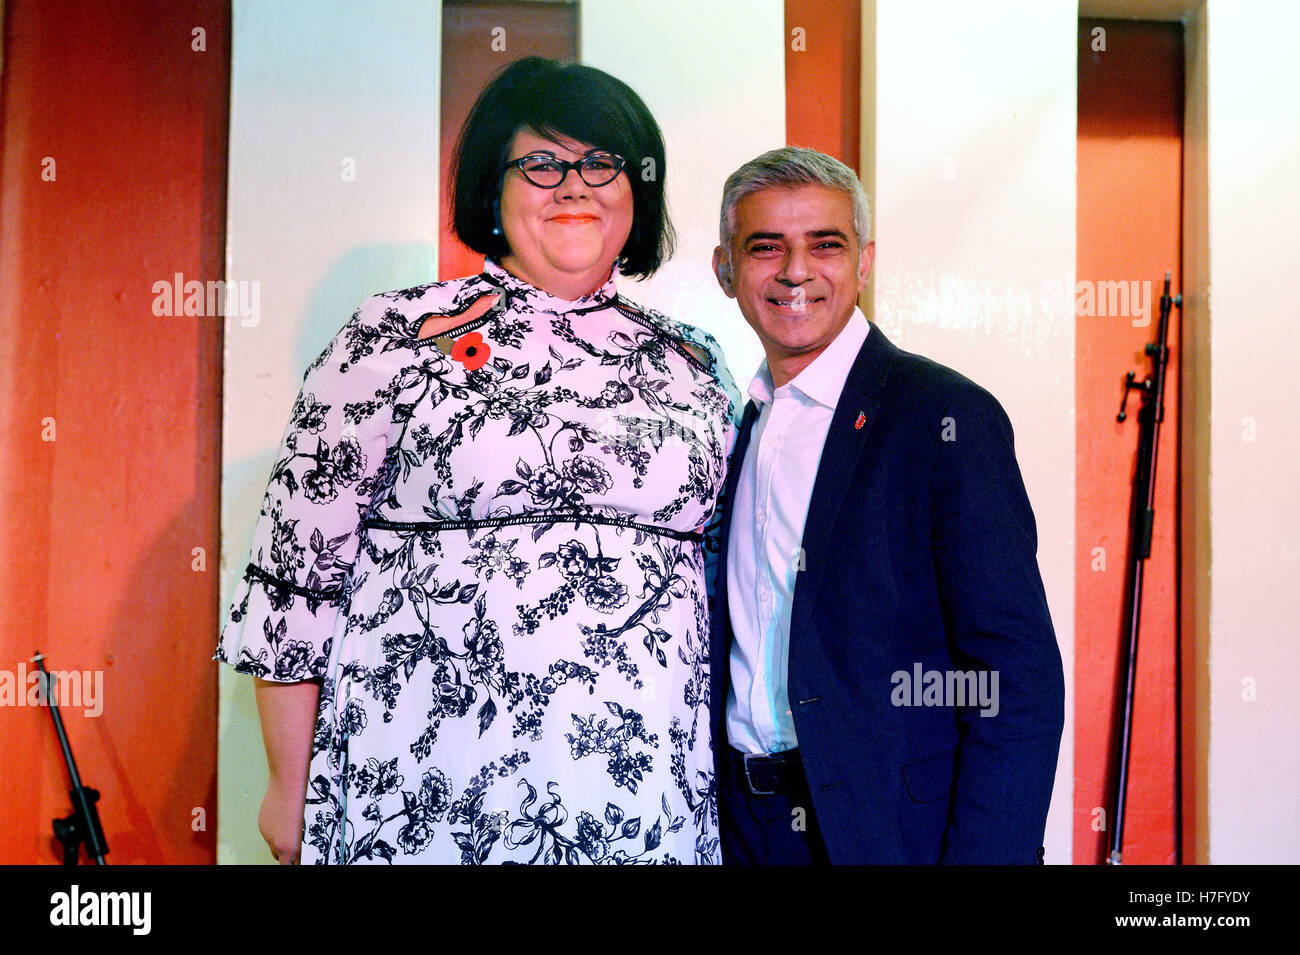 The Mayor of London Sadiq Khan, with Amy Lame, who has been appointed as his first Night Czar, at the 100 Club, London. Stock Photo